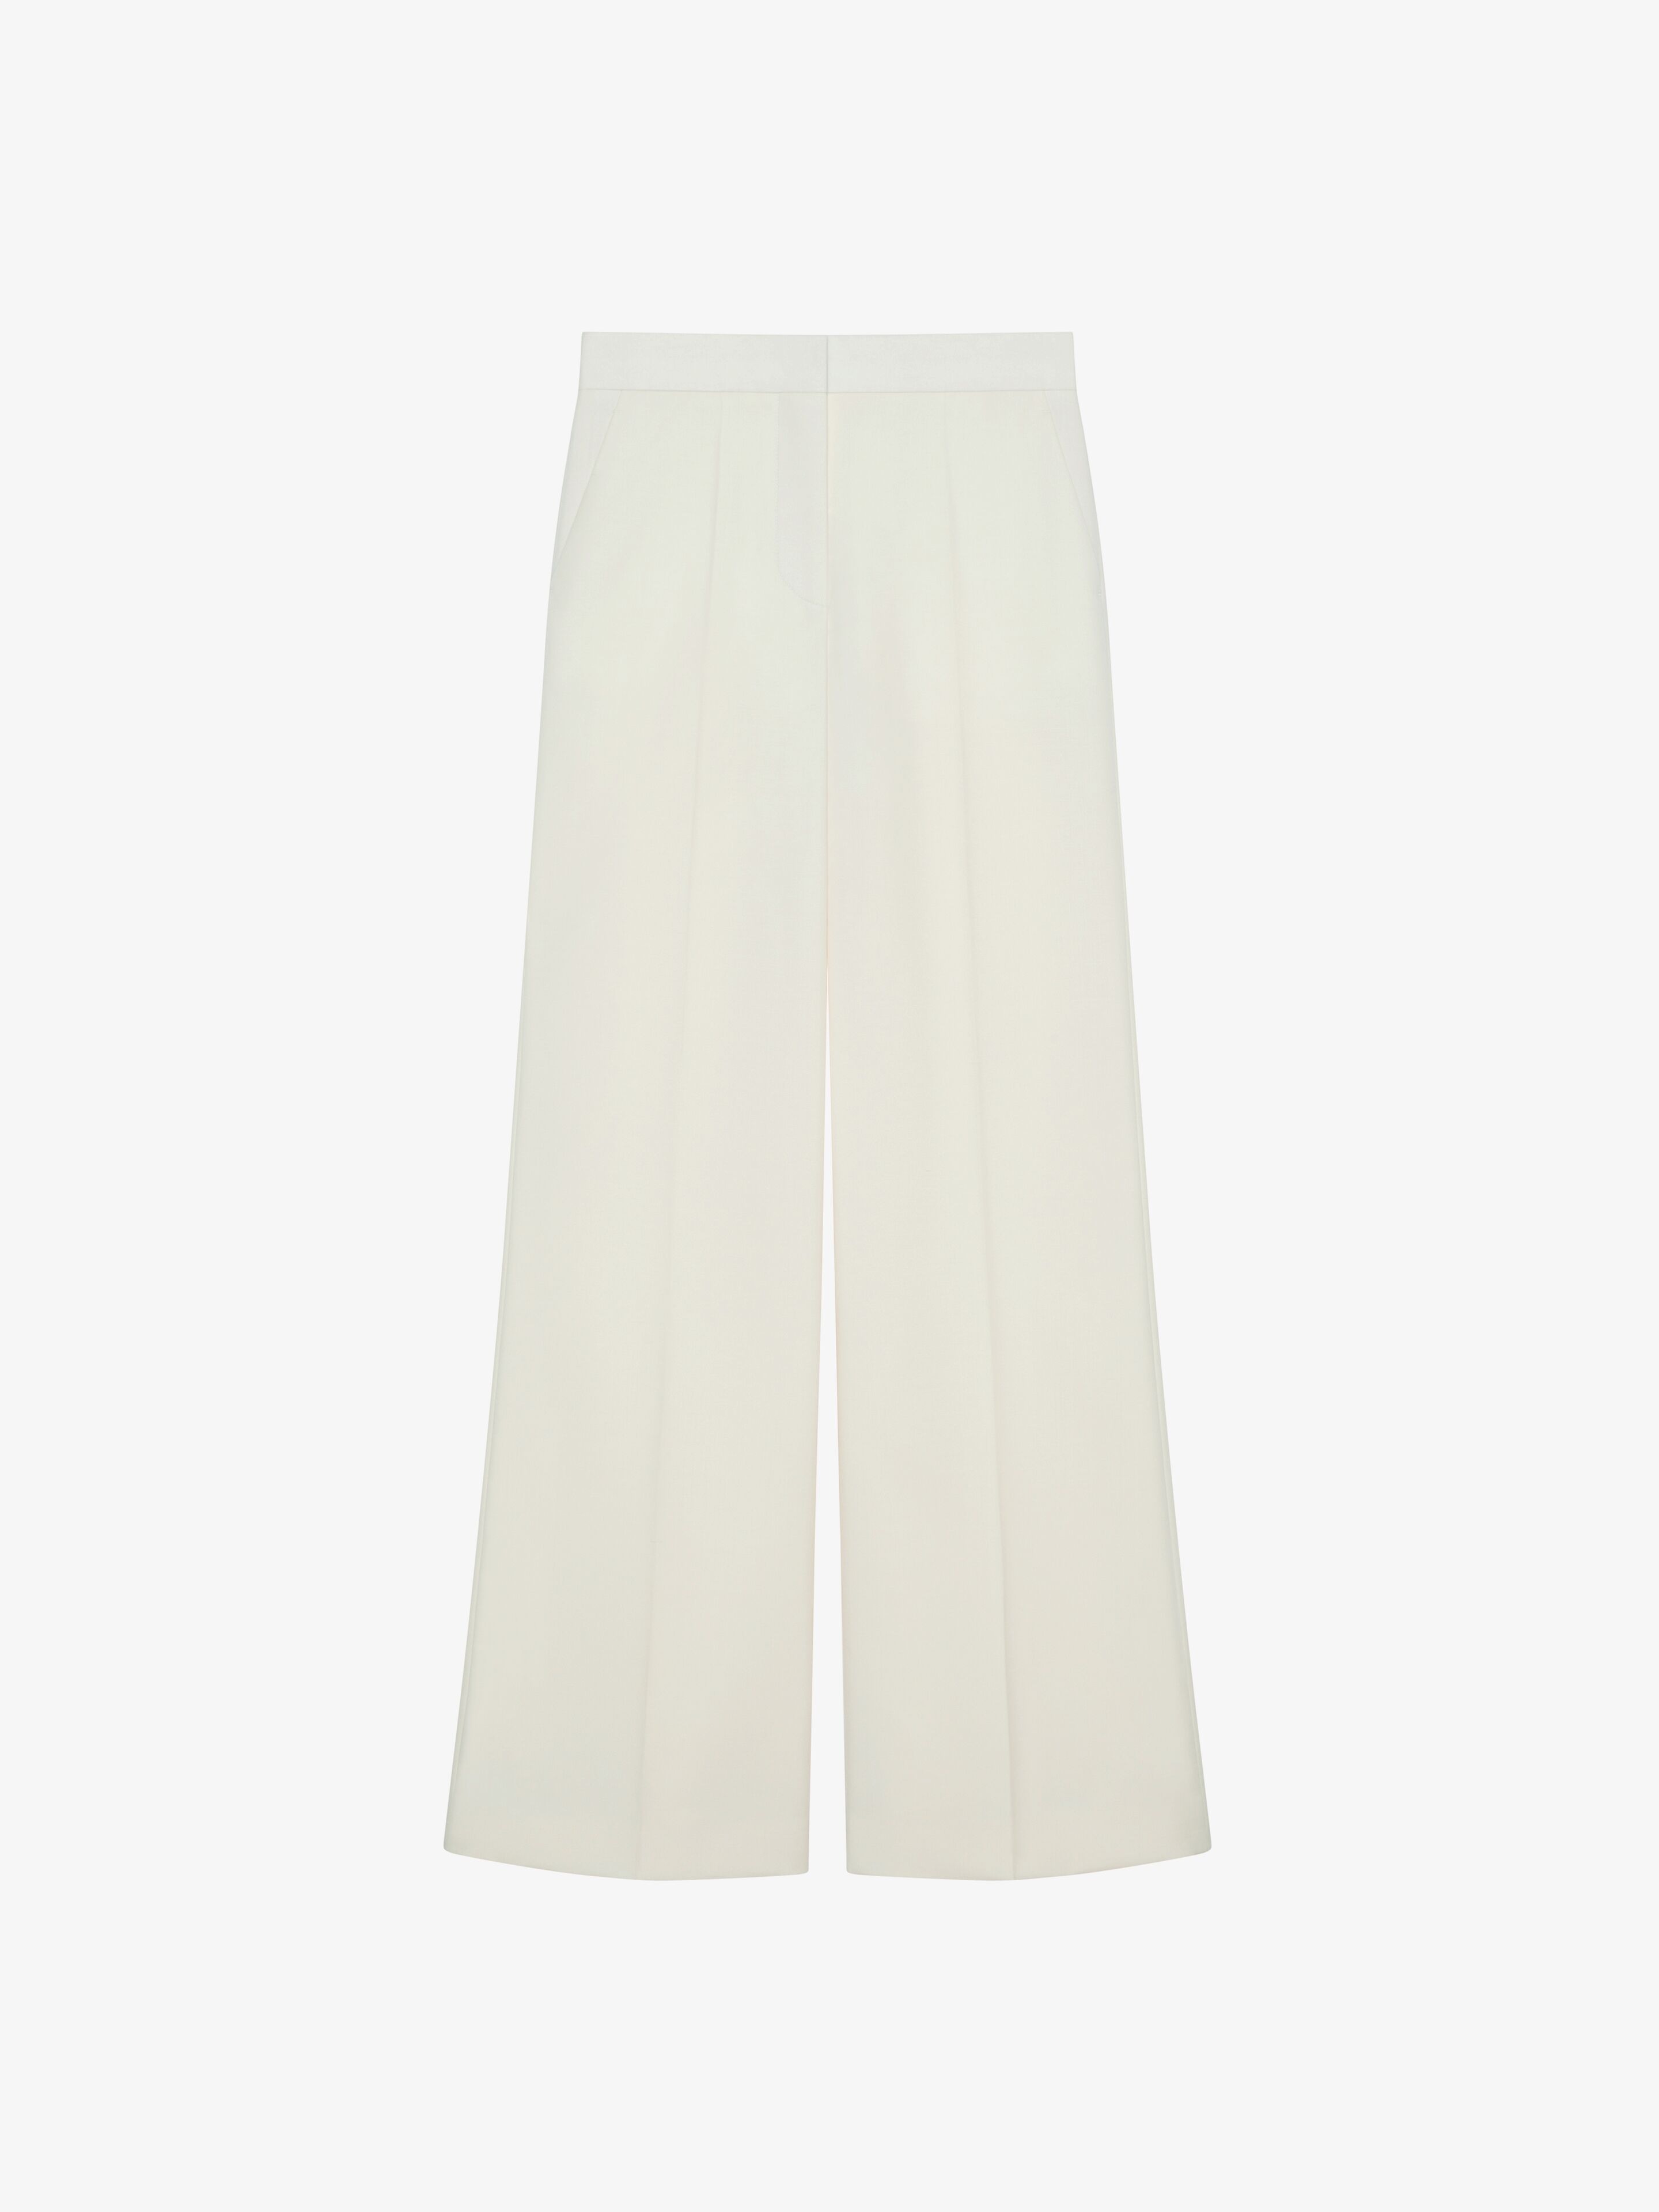 Luxury Pants & Shorts Collection for Women | Givenchy